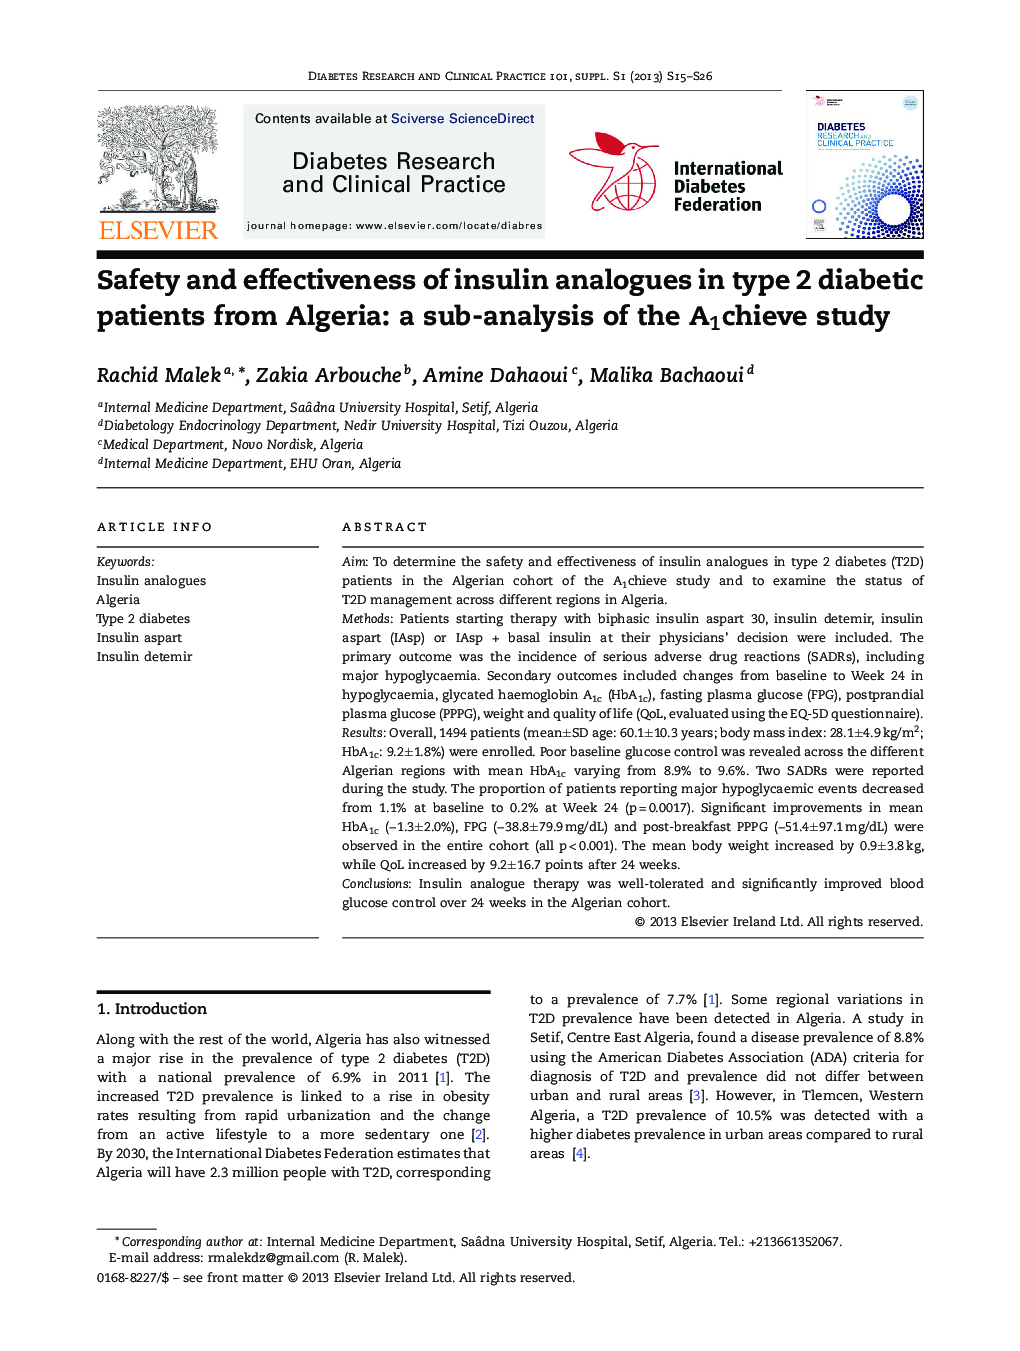 Safety and effectiveness of insulin analogues in type 2 diabetic patients from Algeria: a sub-analysis of the A1chieve study